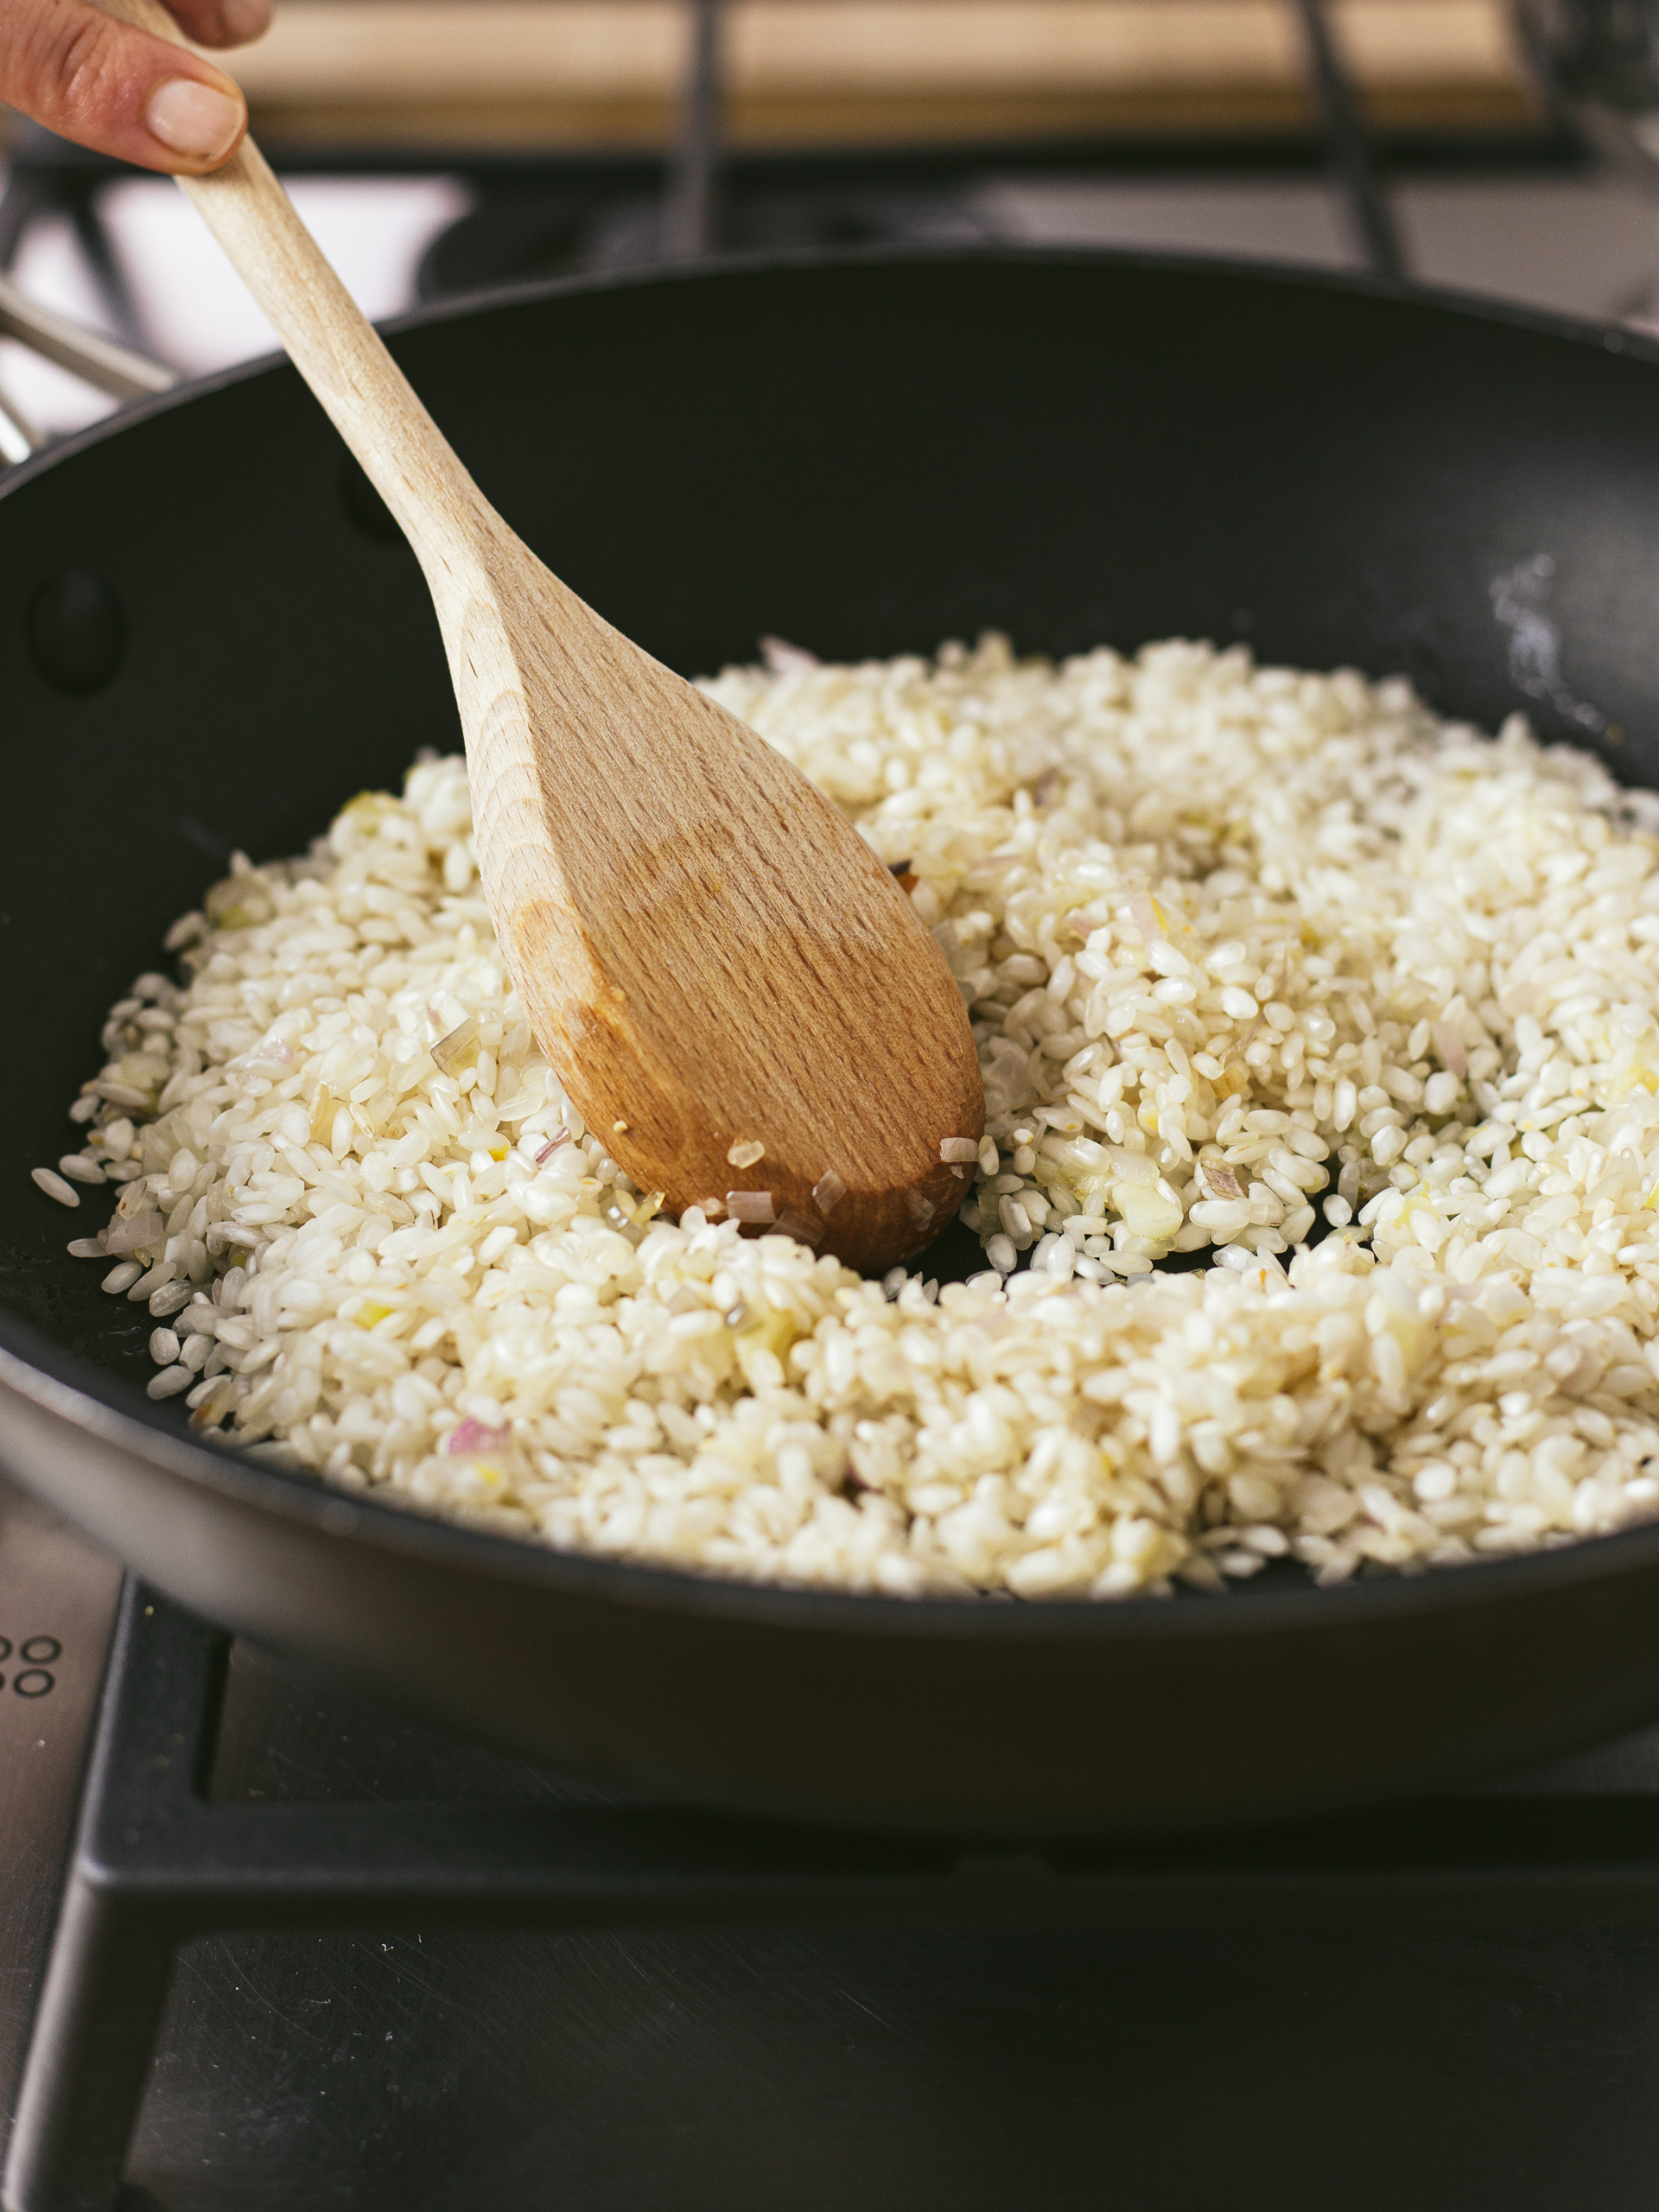 risotto rice dry cooking in a skillet